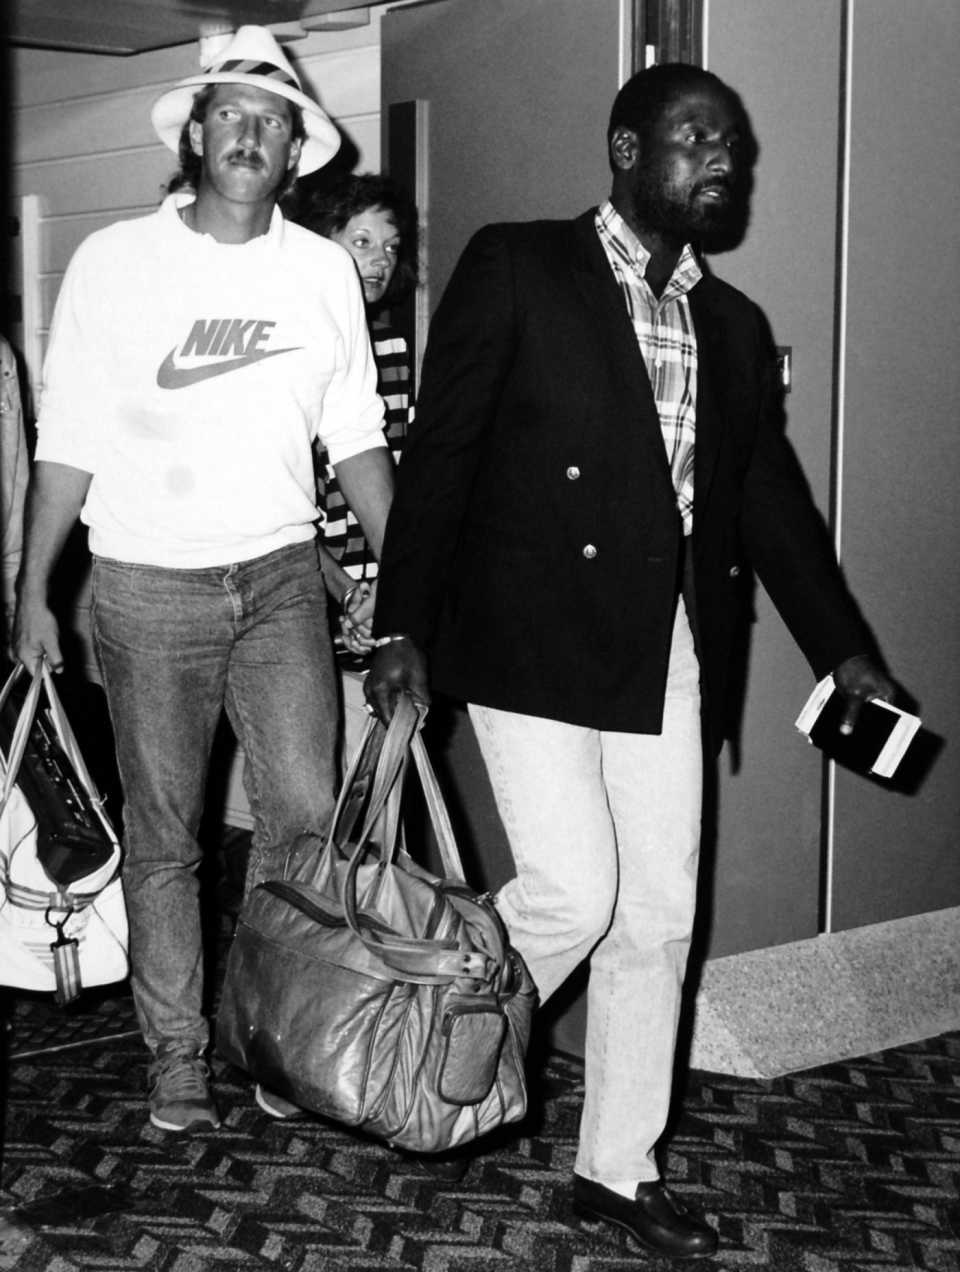 Ian Botham and Viv Richards arrive in London after England's tour of West Indies, April 23, 1986